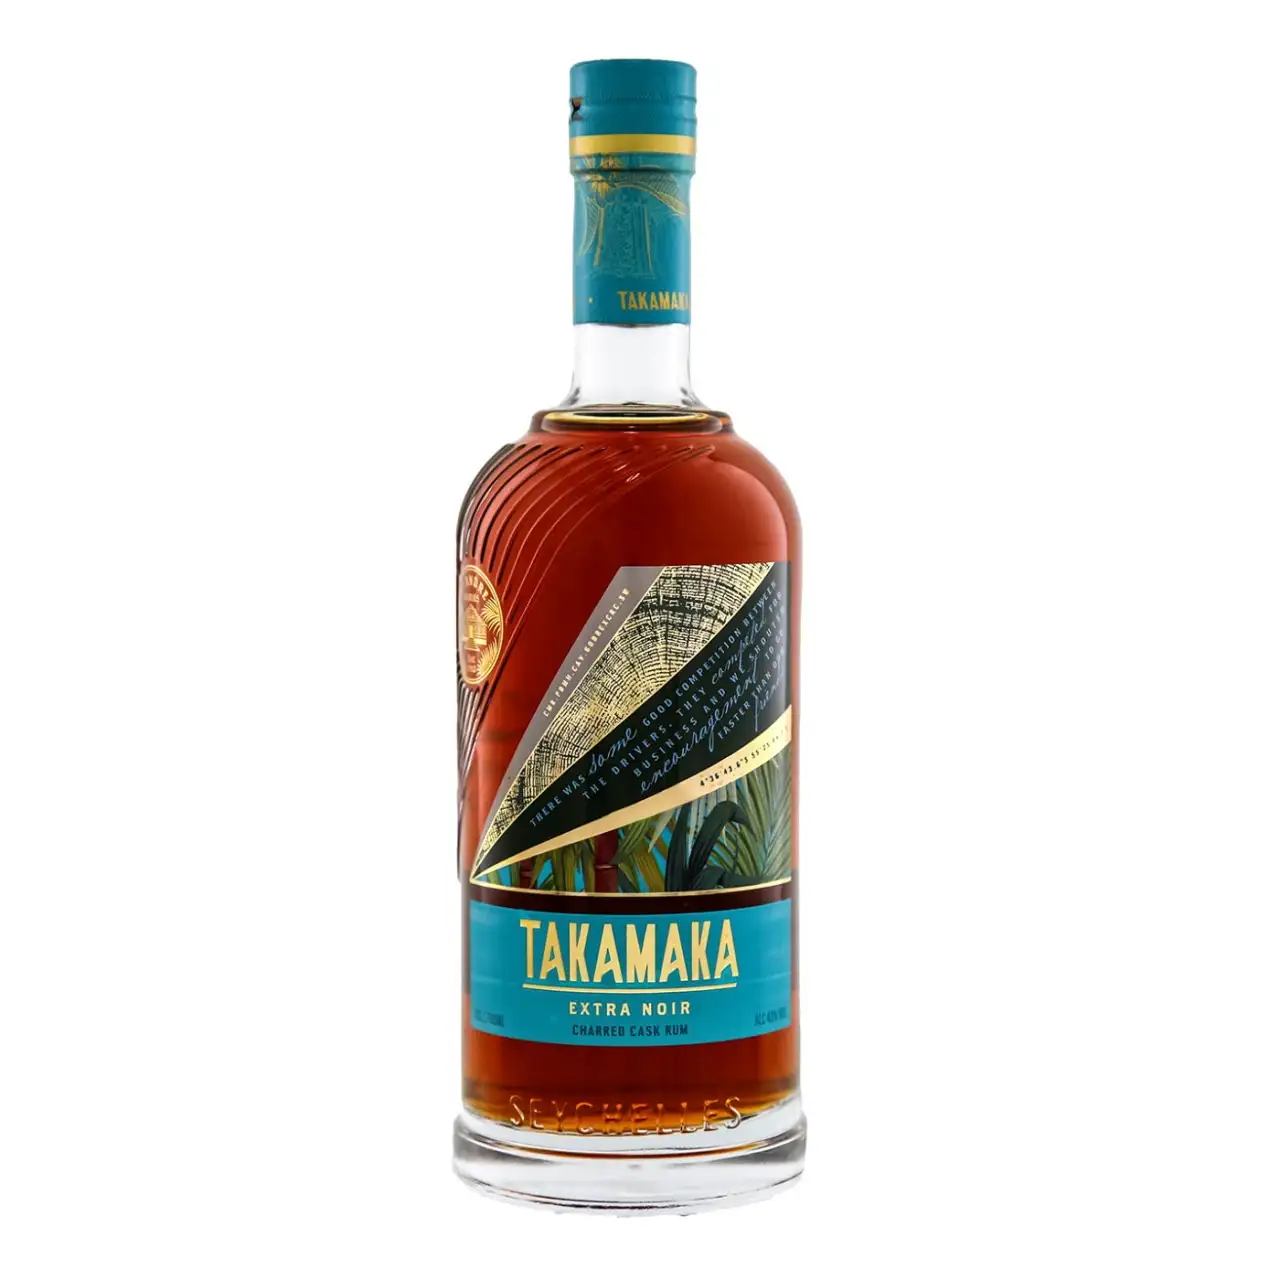 Image of the front of the bottle of the rum Takamaka Extra Noir (Charred Cask Rum)